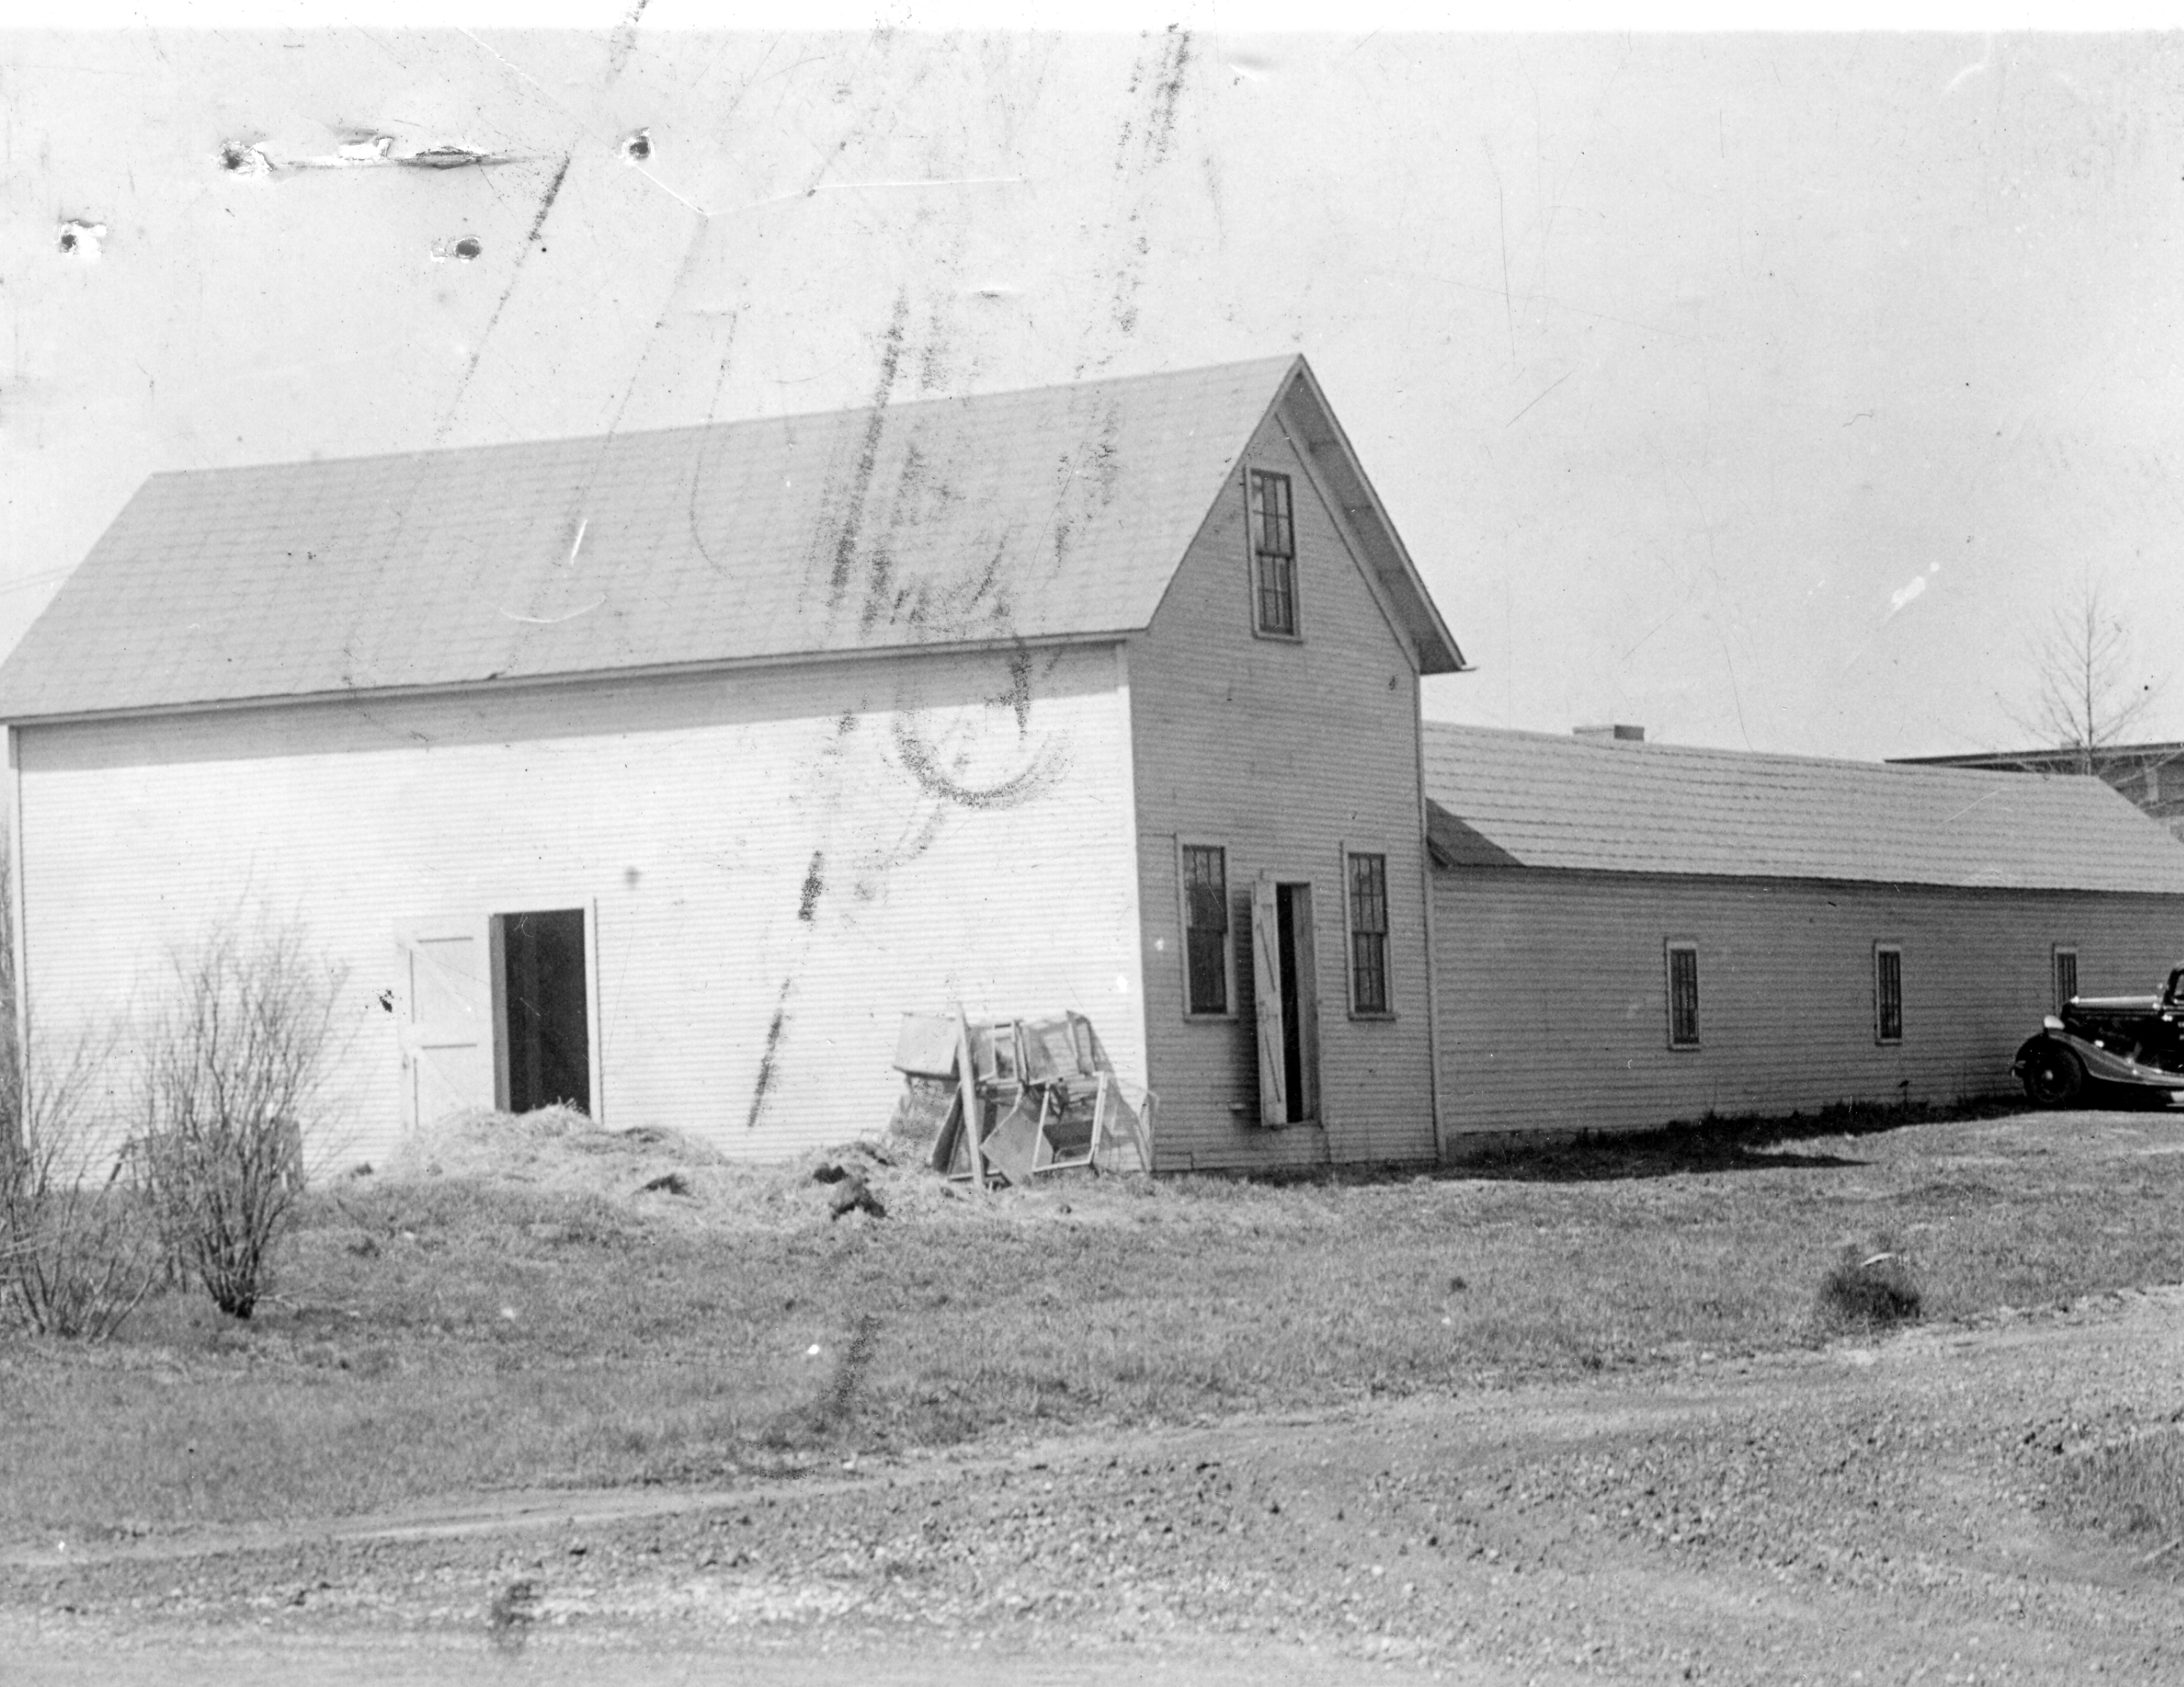 Photograph of poultry house